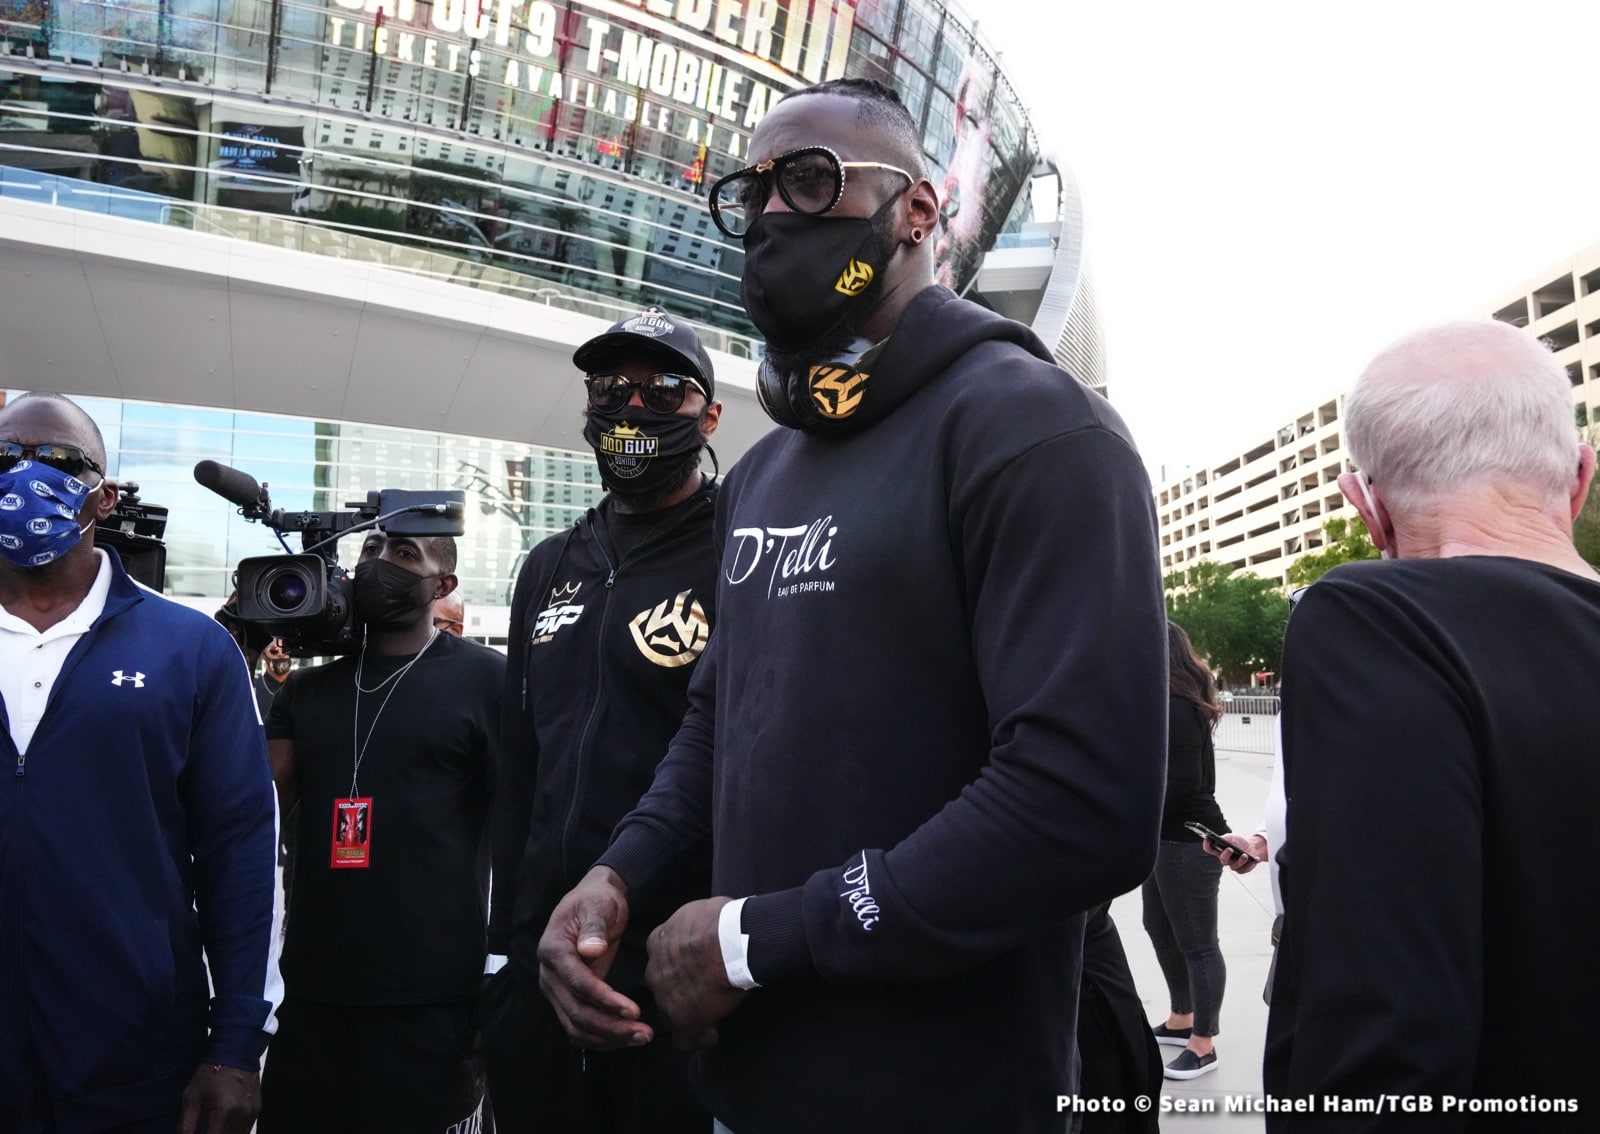 Image: Deontay Wilder says he'll beat Fury up before knocking him out